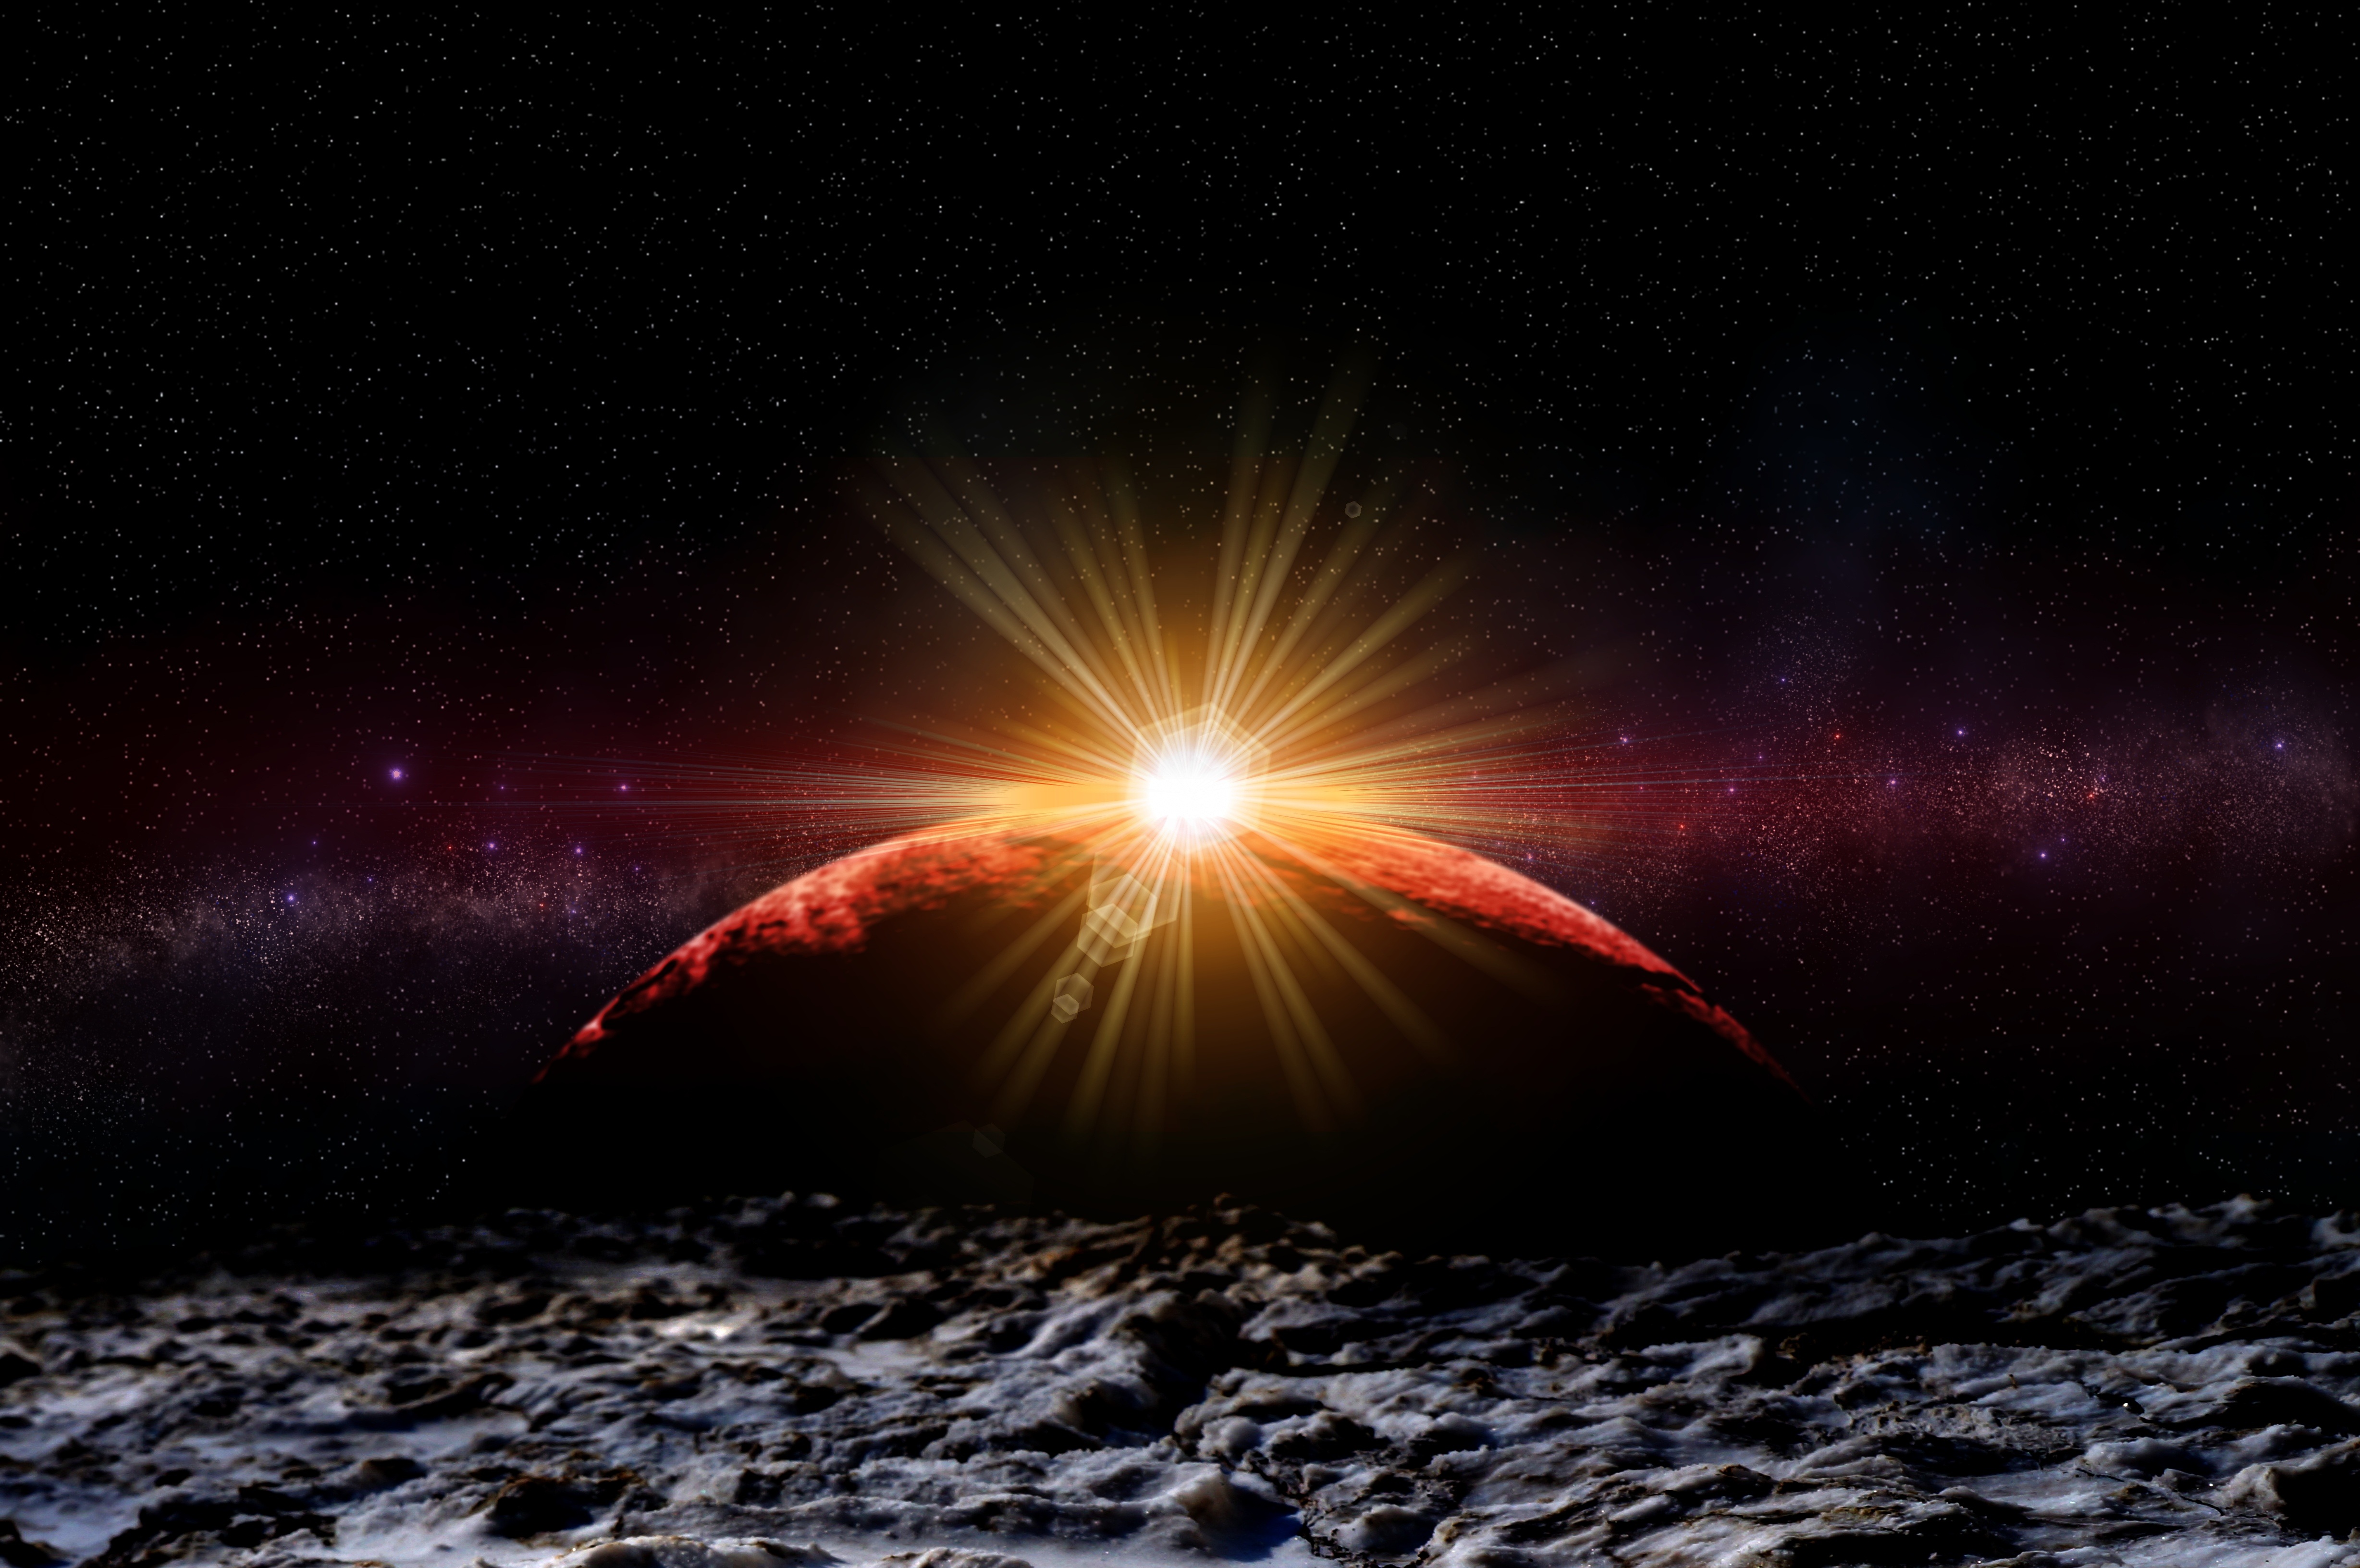 eclipse, universe, stars, galaxy, planet, photoshop High Definition image